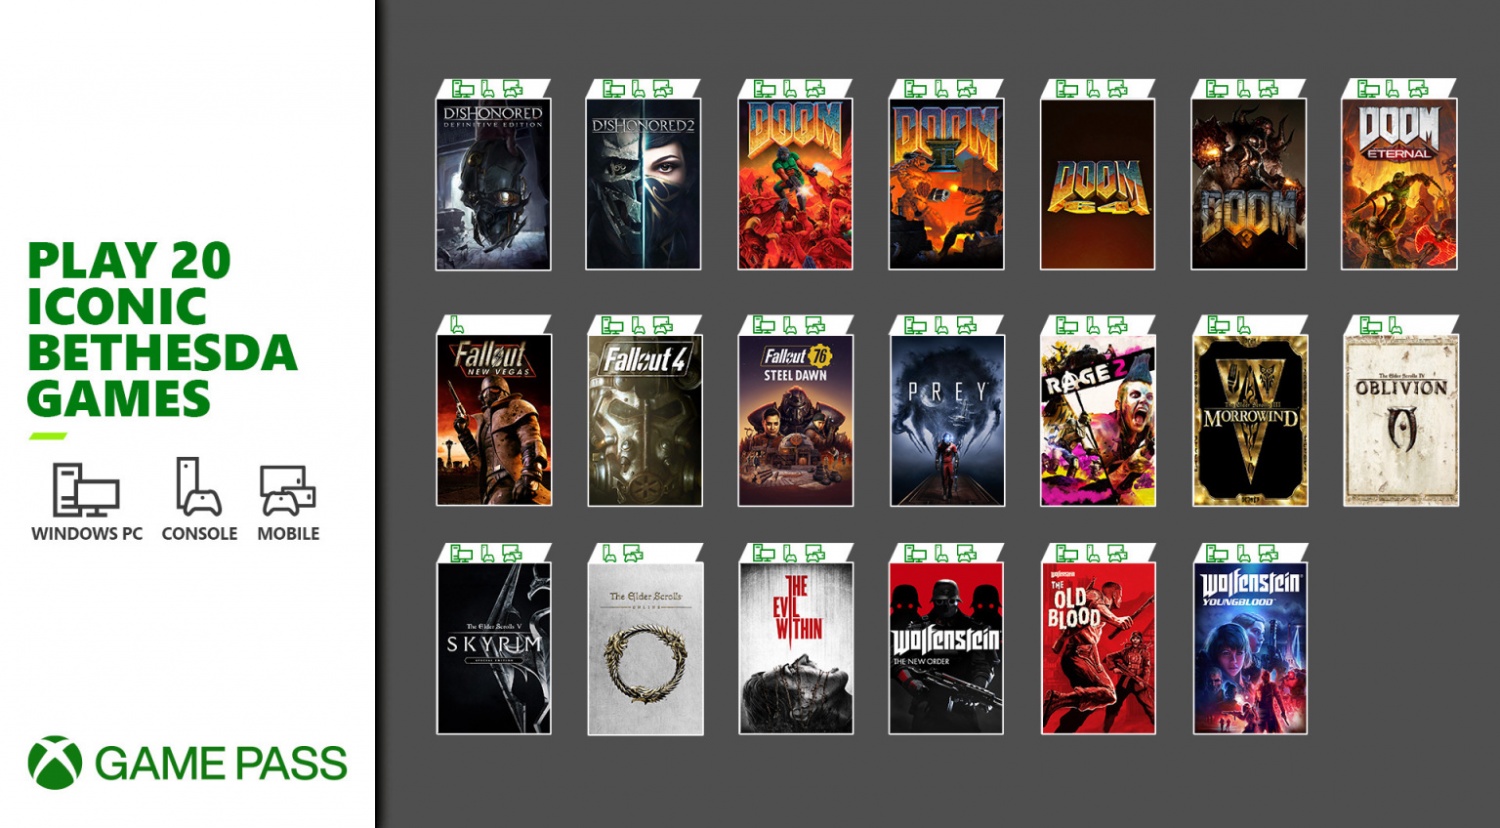 Bethesda Games available at Xbox Game Pass as of March 12